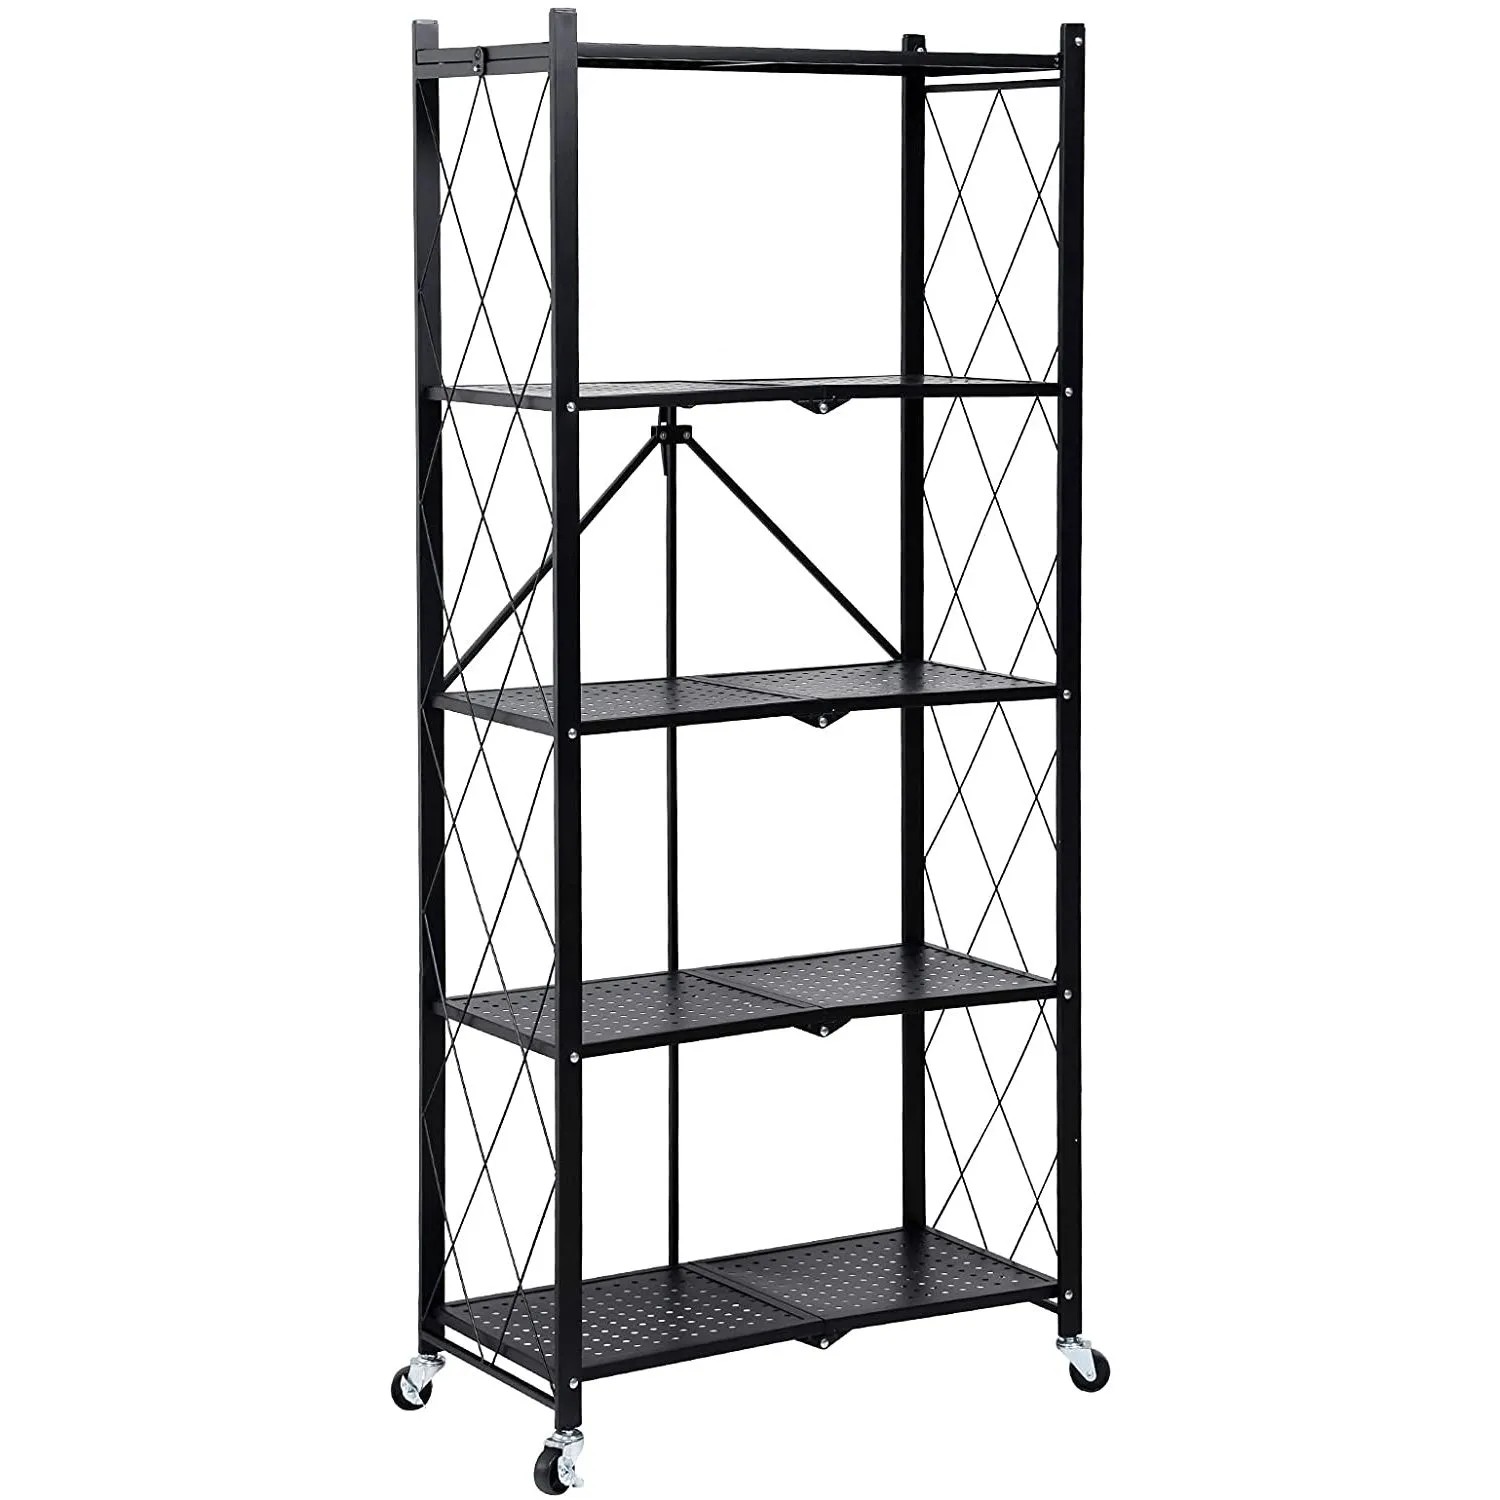 5-Tier Heavy Duty Foldable Metal Rack Storage Shelving Unit with Wheels Moving Easily Organizer Shelves Great for Garage Kitchen Holds up to 1250 lbs Capacity, Black